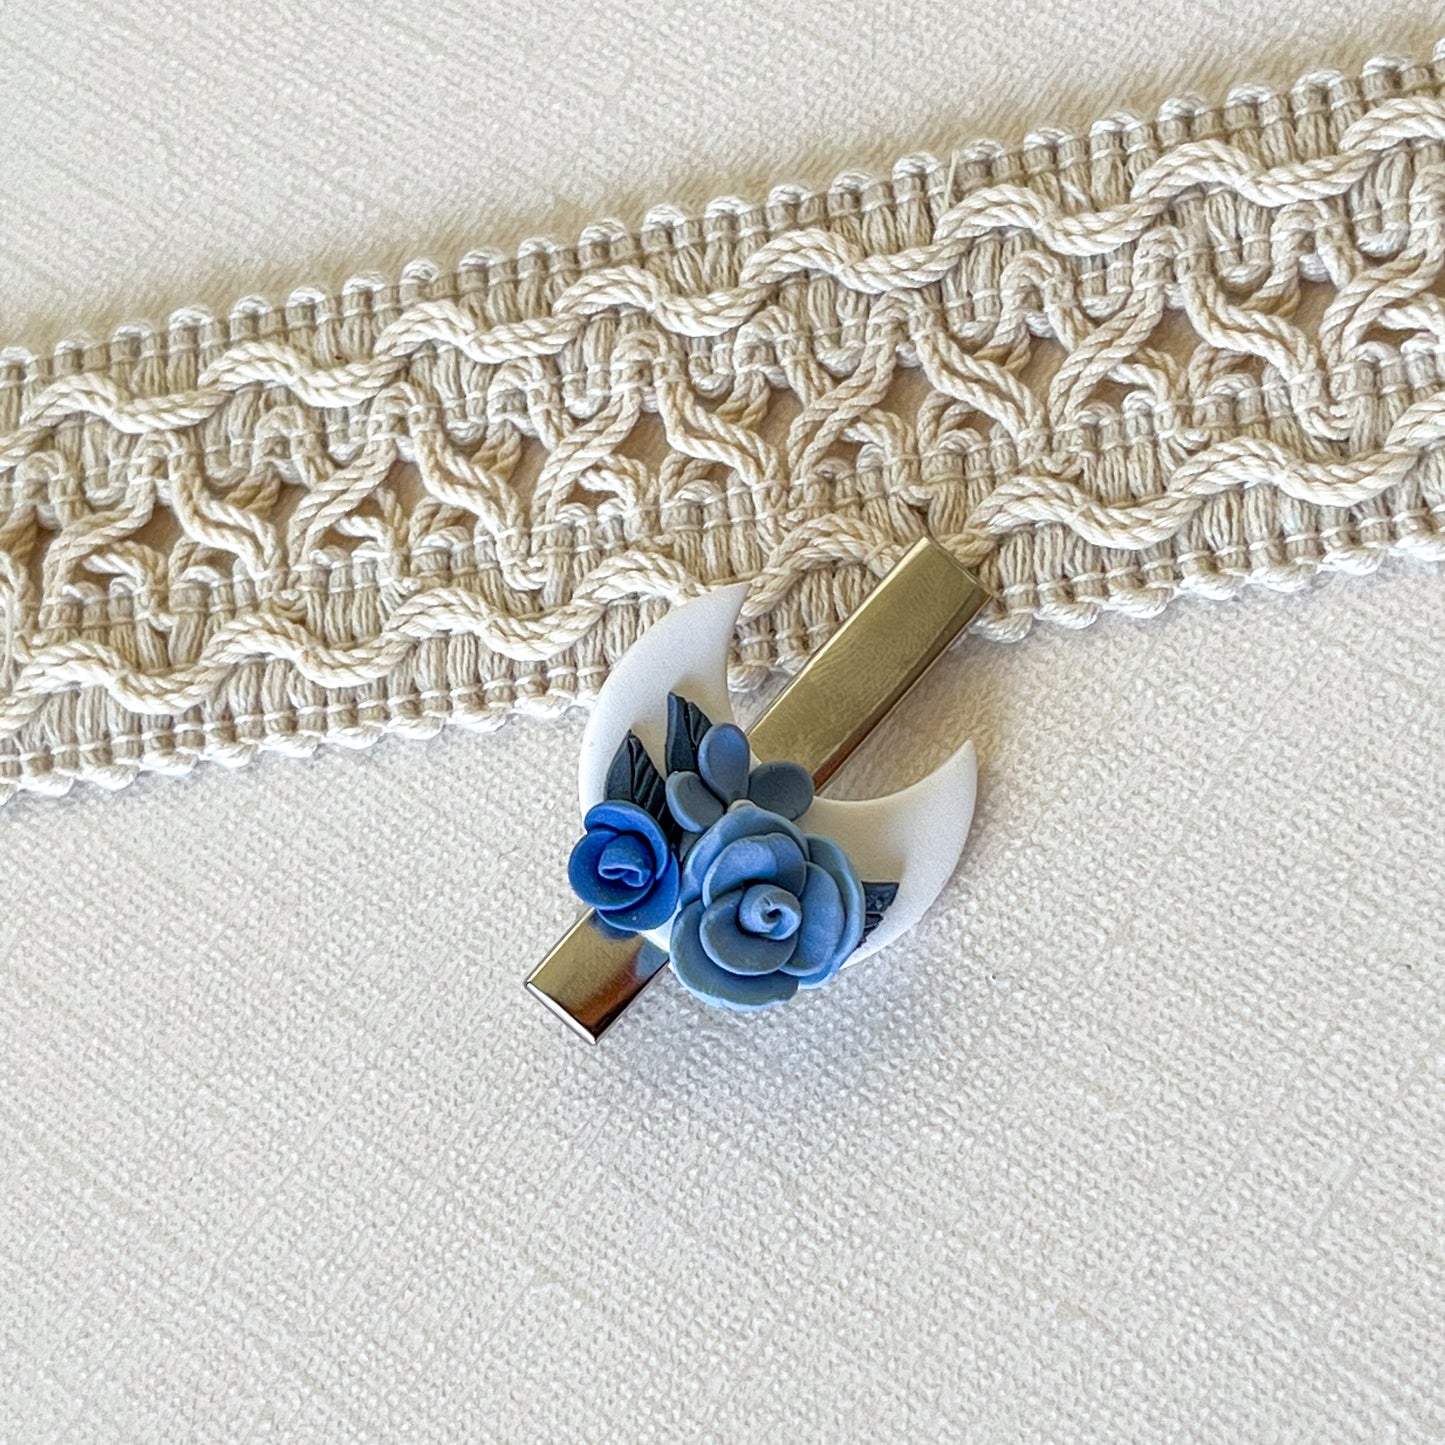 White moon hair clip with blue floral details | 1.75" alligator clip